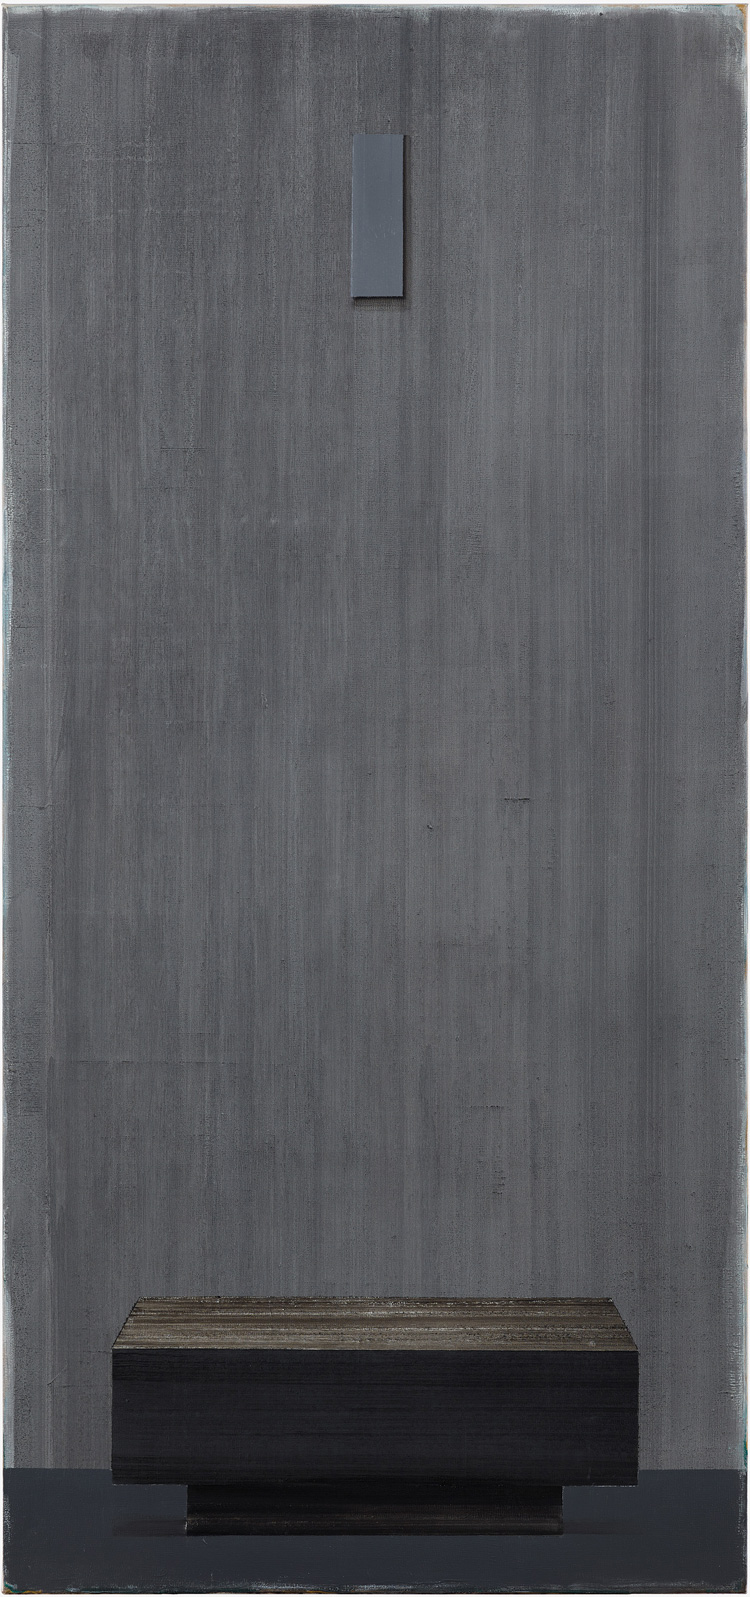 Michael Simpson. Squint 66, 2019. Oil on canvas, 230 x 107.5 cm. Images courtesy the artist and Blain|Southern.